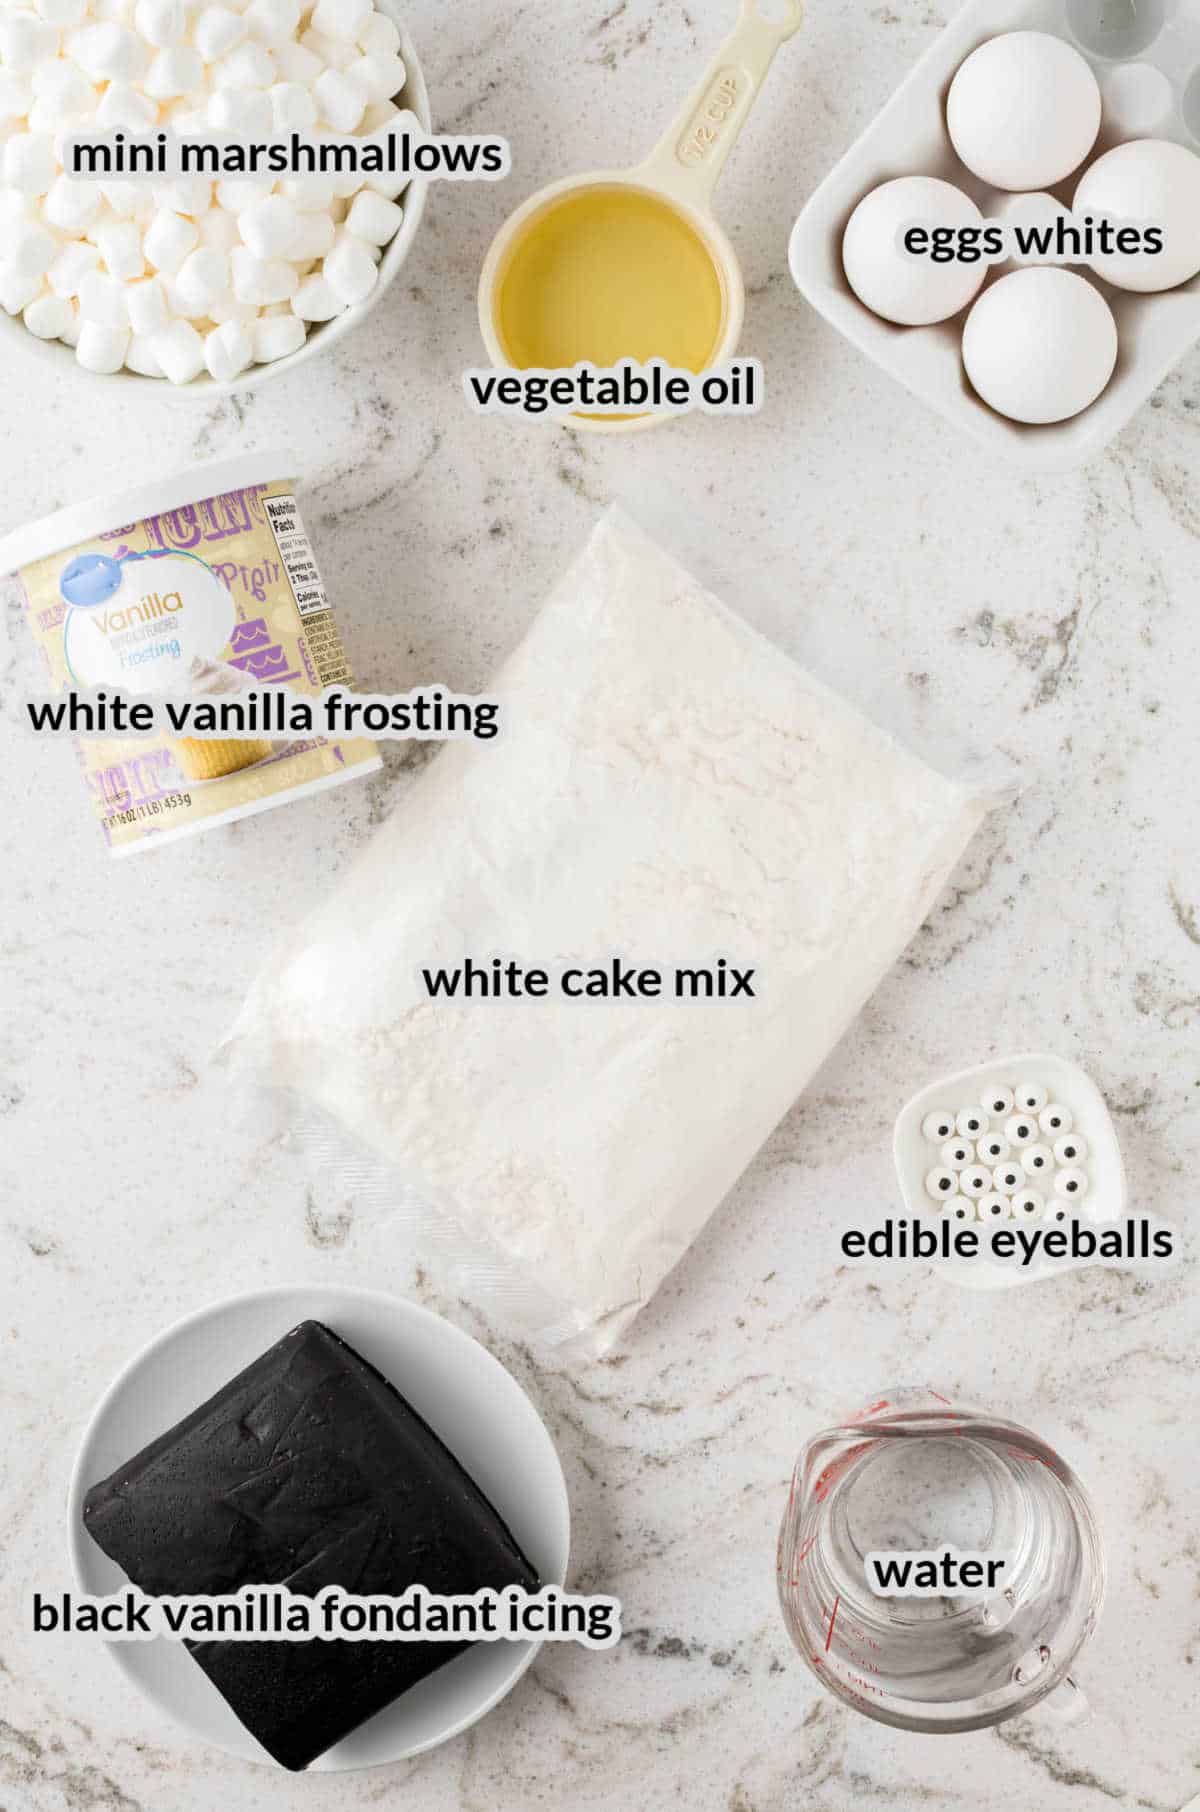 Overhead Image of the Sheep Cupcakes Recipe Ingredients